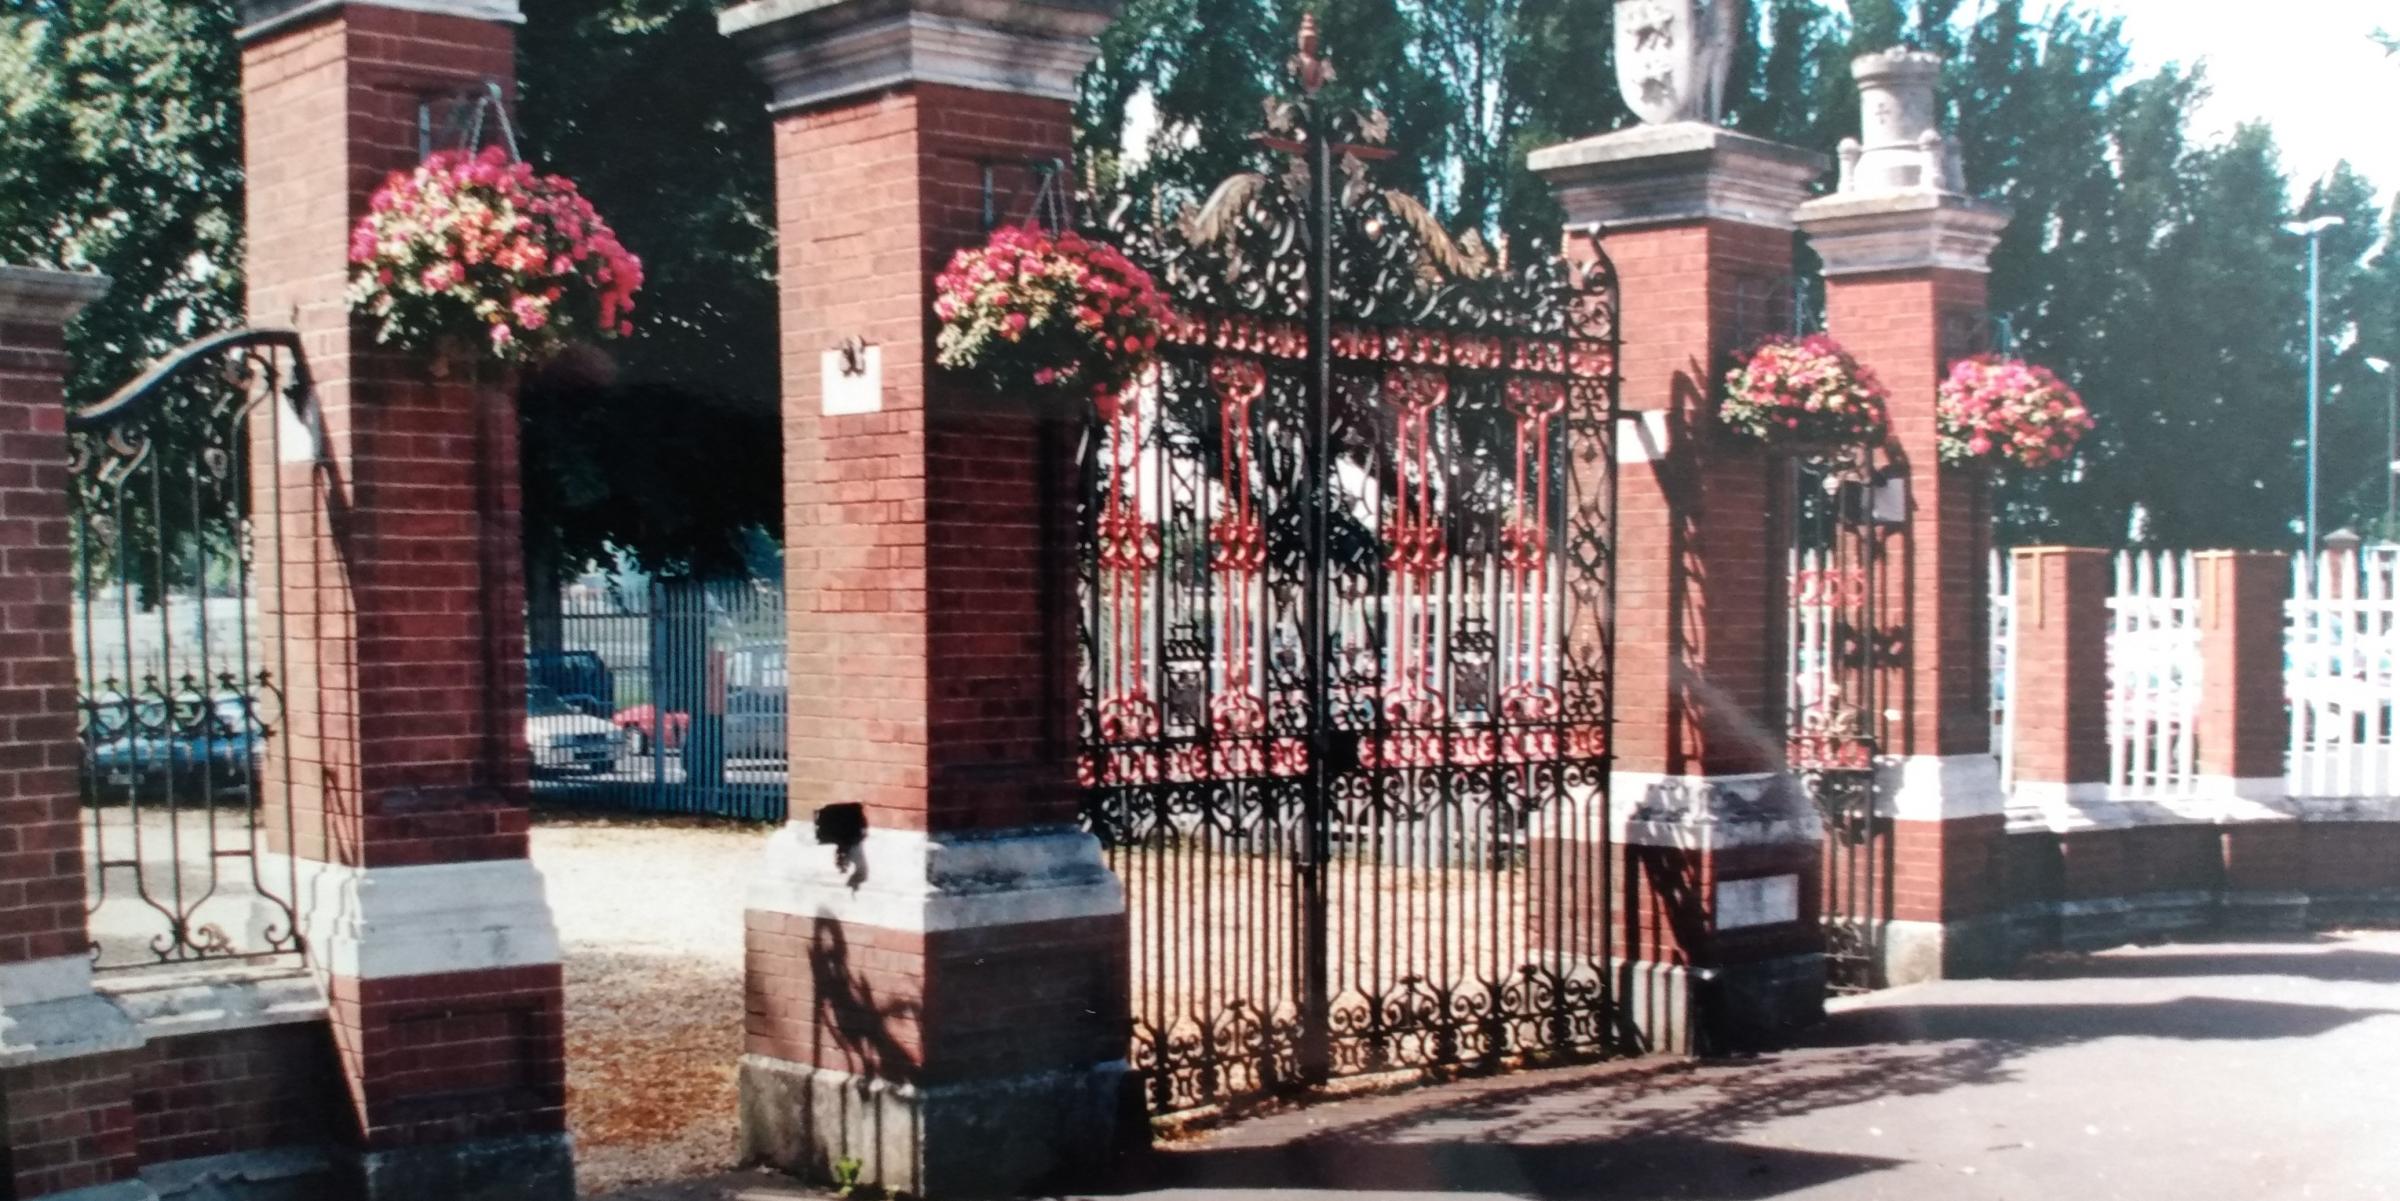 The famous gates at the junction of Castle Street, Croft Road and Severn Terrace